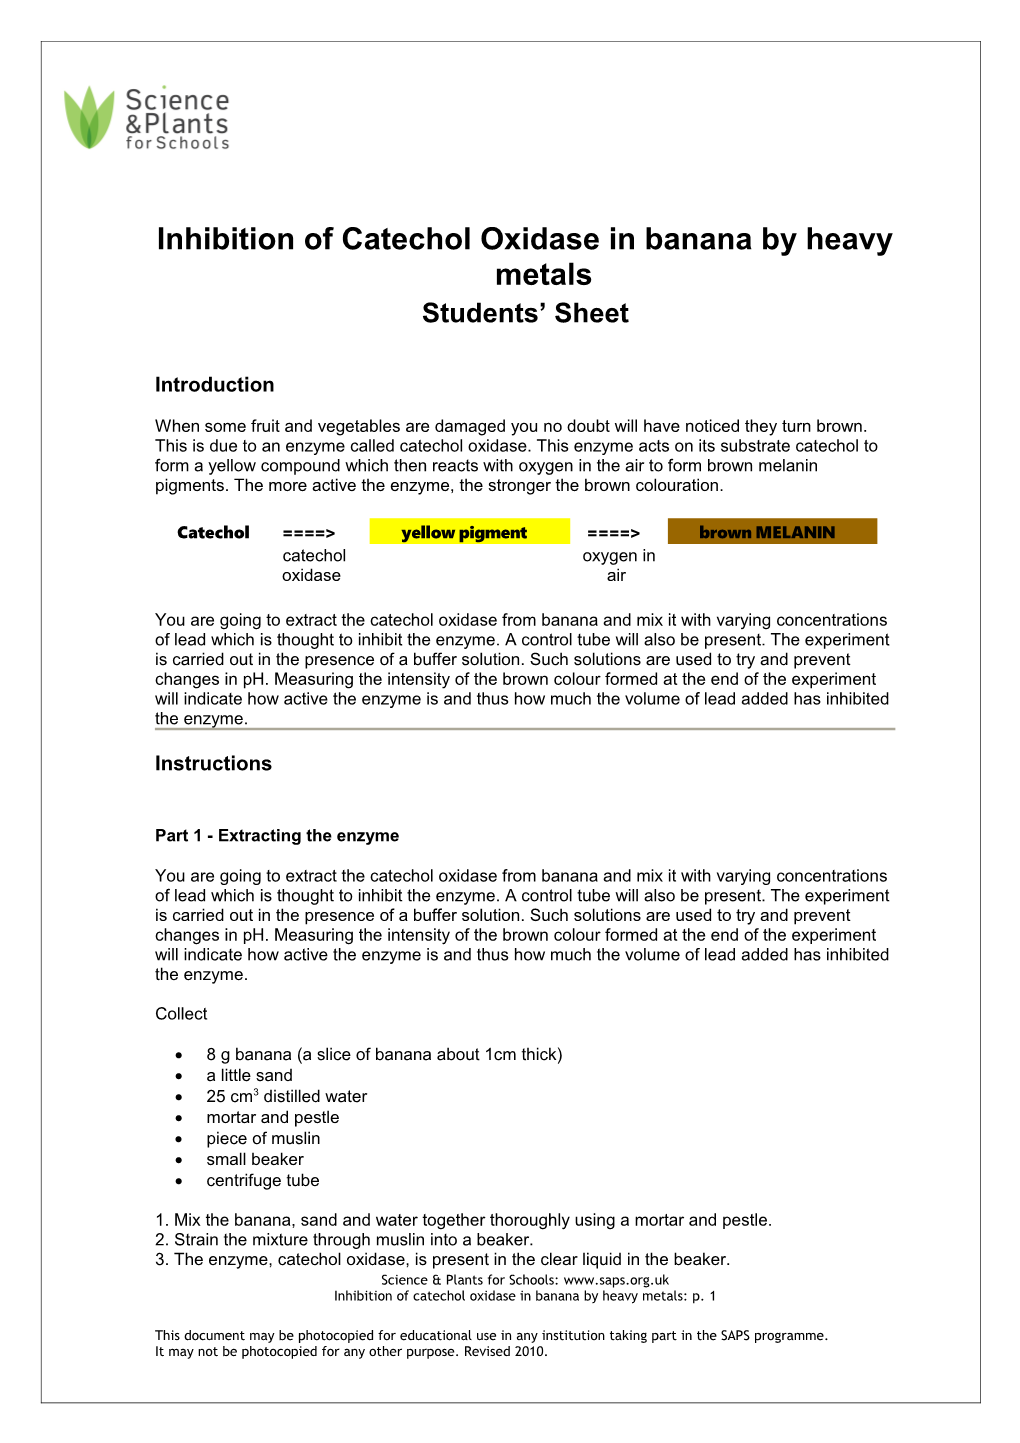 Inhibition of Catechol Oxidase in Banana by Heavy Metals